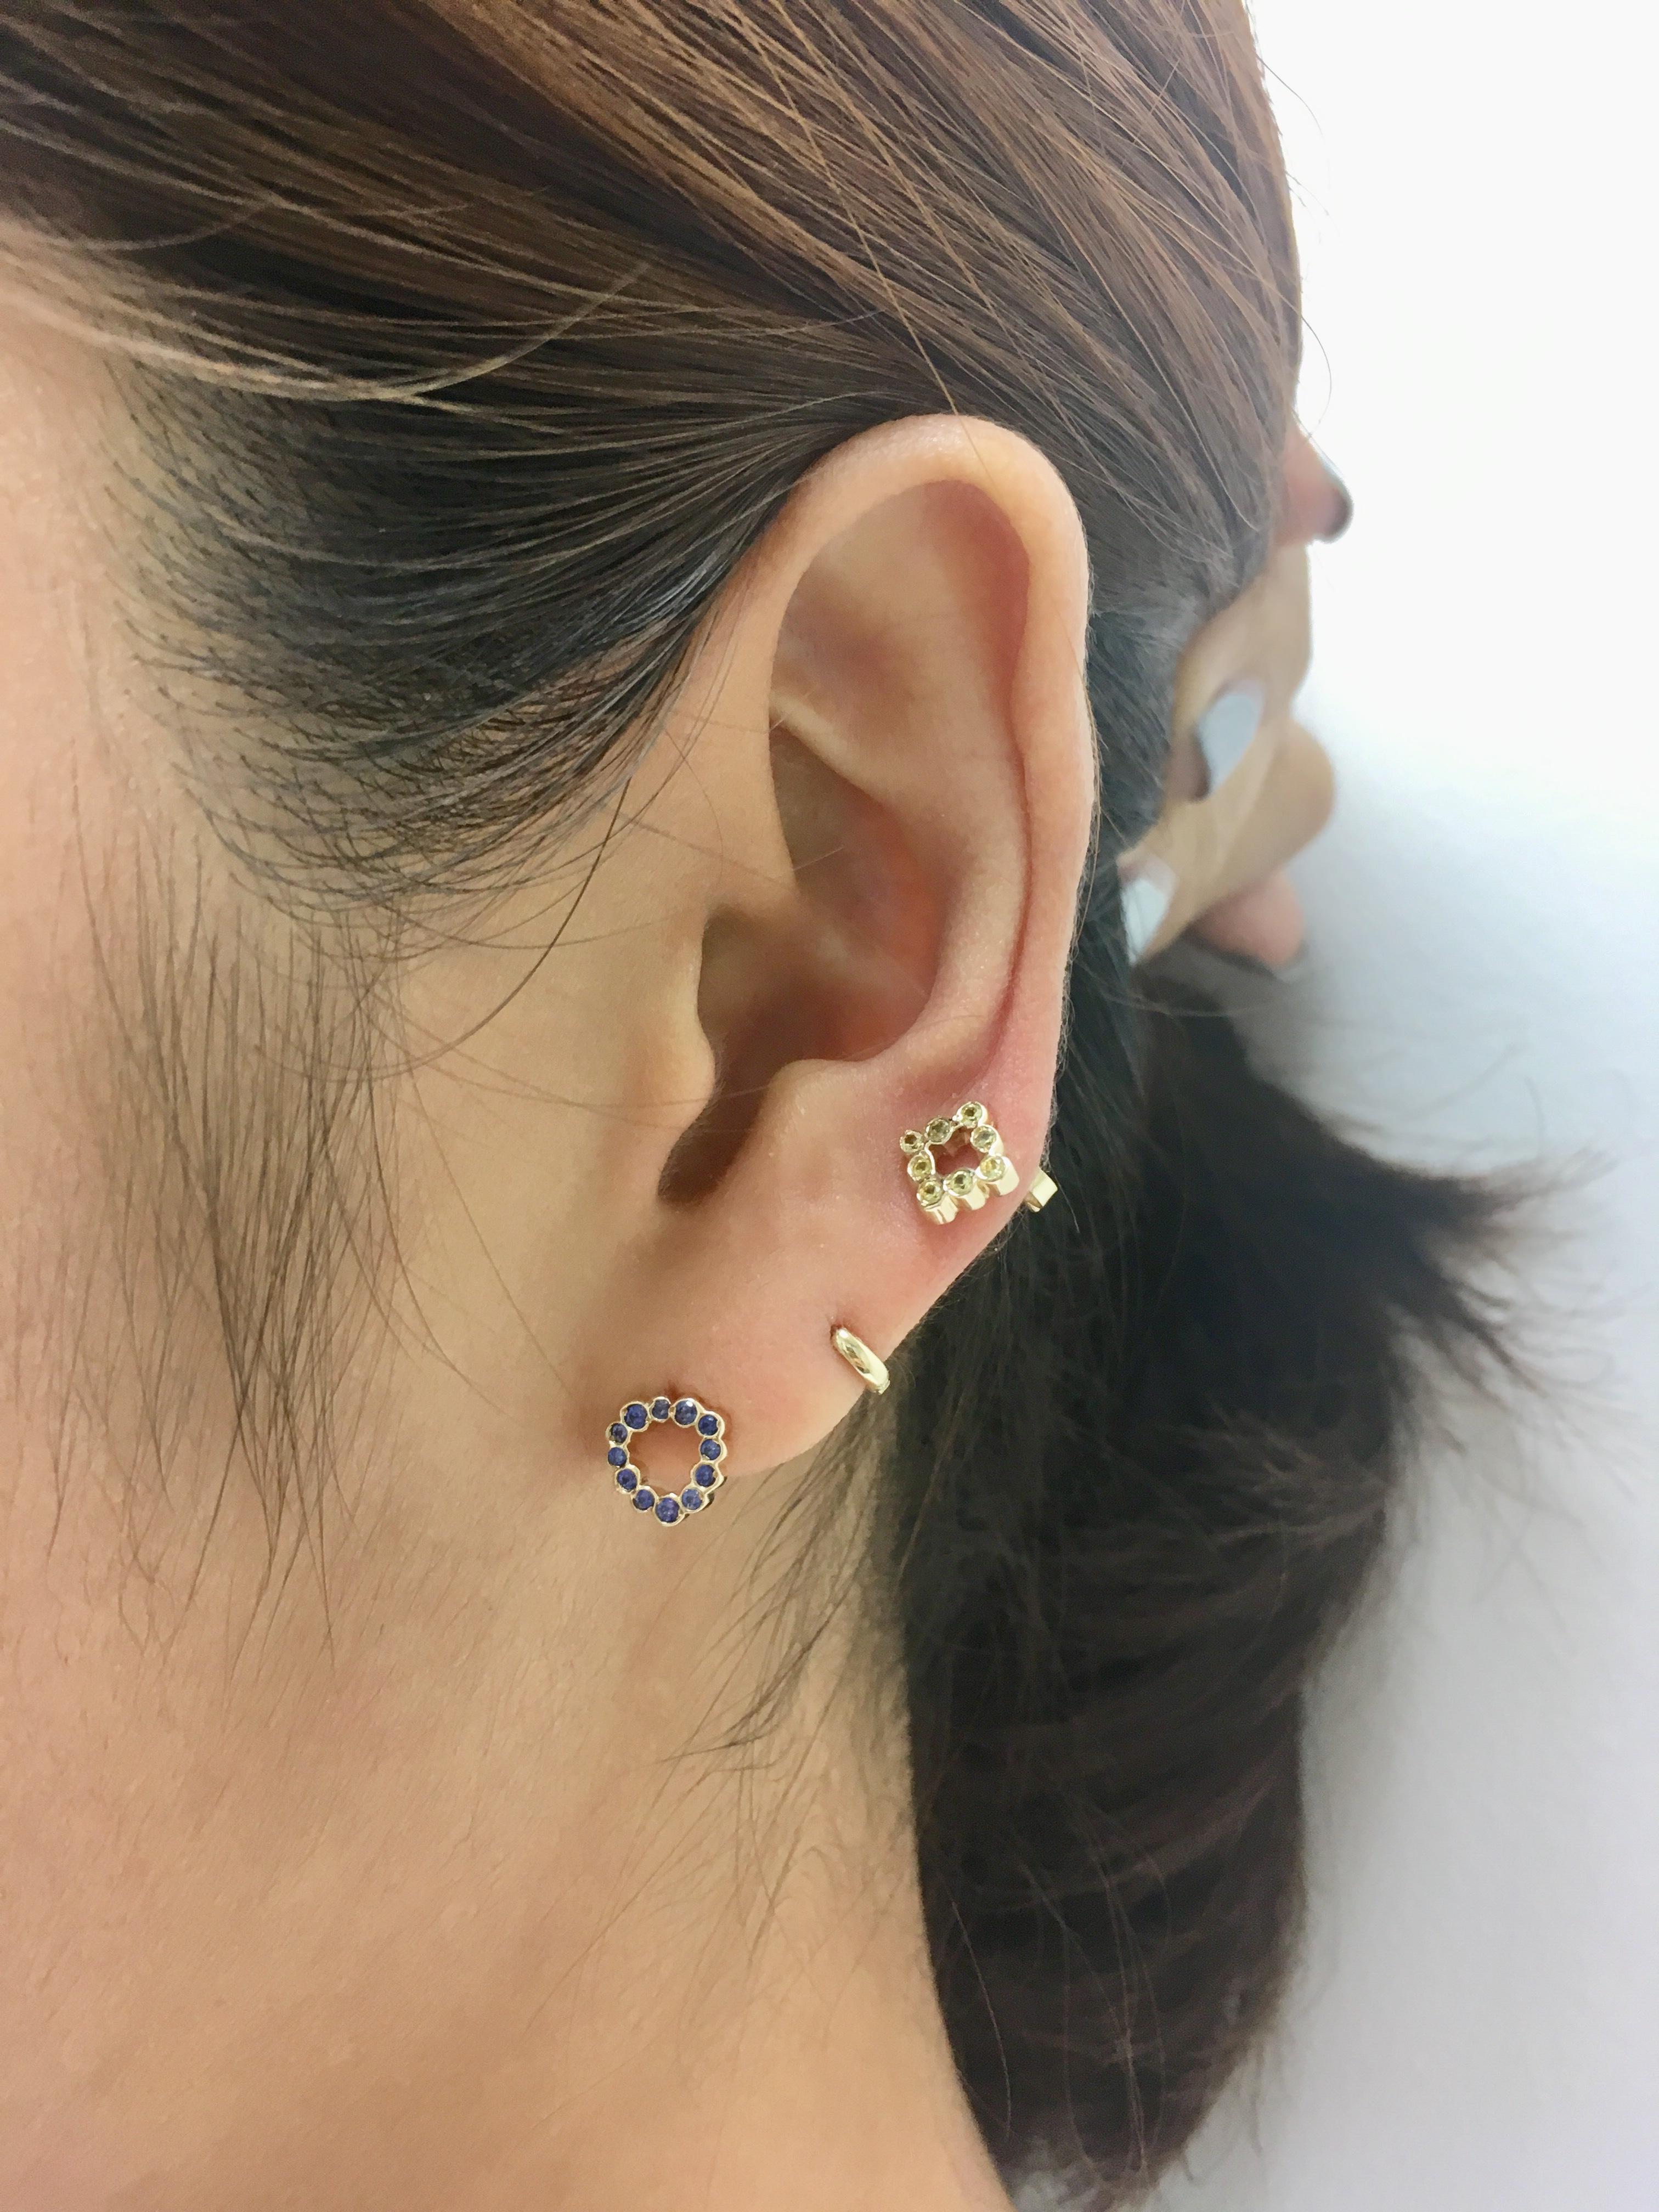 Wear these miniature diamond shape stud earrings with Yellow Sapphires for a punch
of color on your ears. Mix and match with your favorite single earrings for a fun mismatched look.

Inspired by seeing the cross-section view of life, as if slicing a